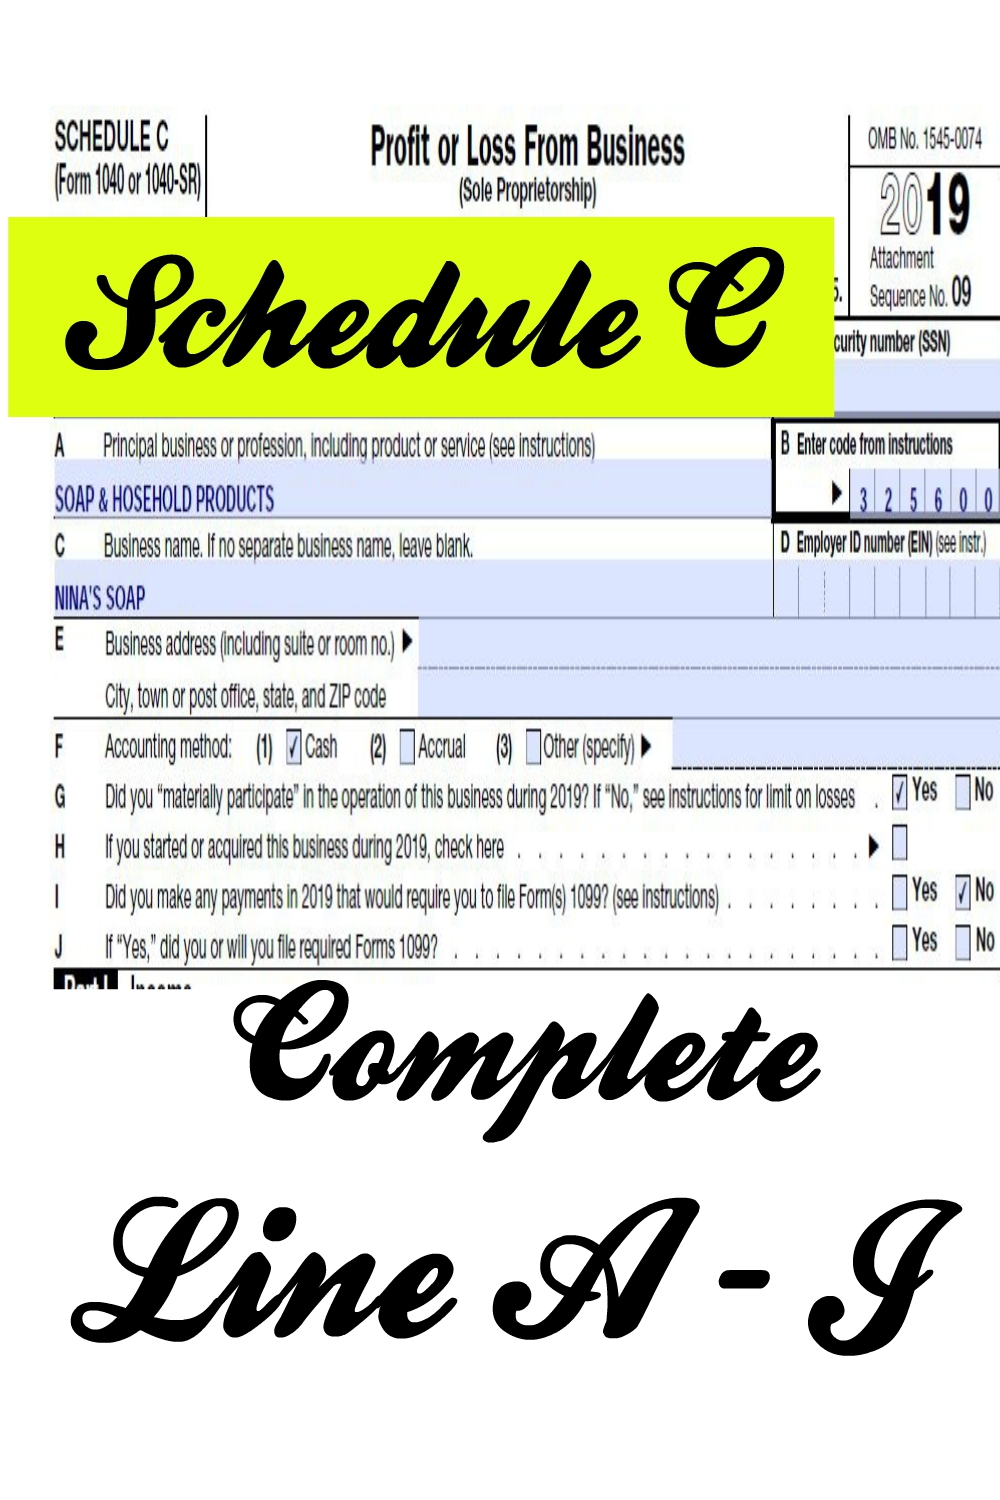 Schedule C Form 1040 -Line A to J